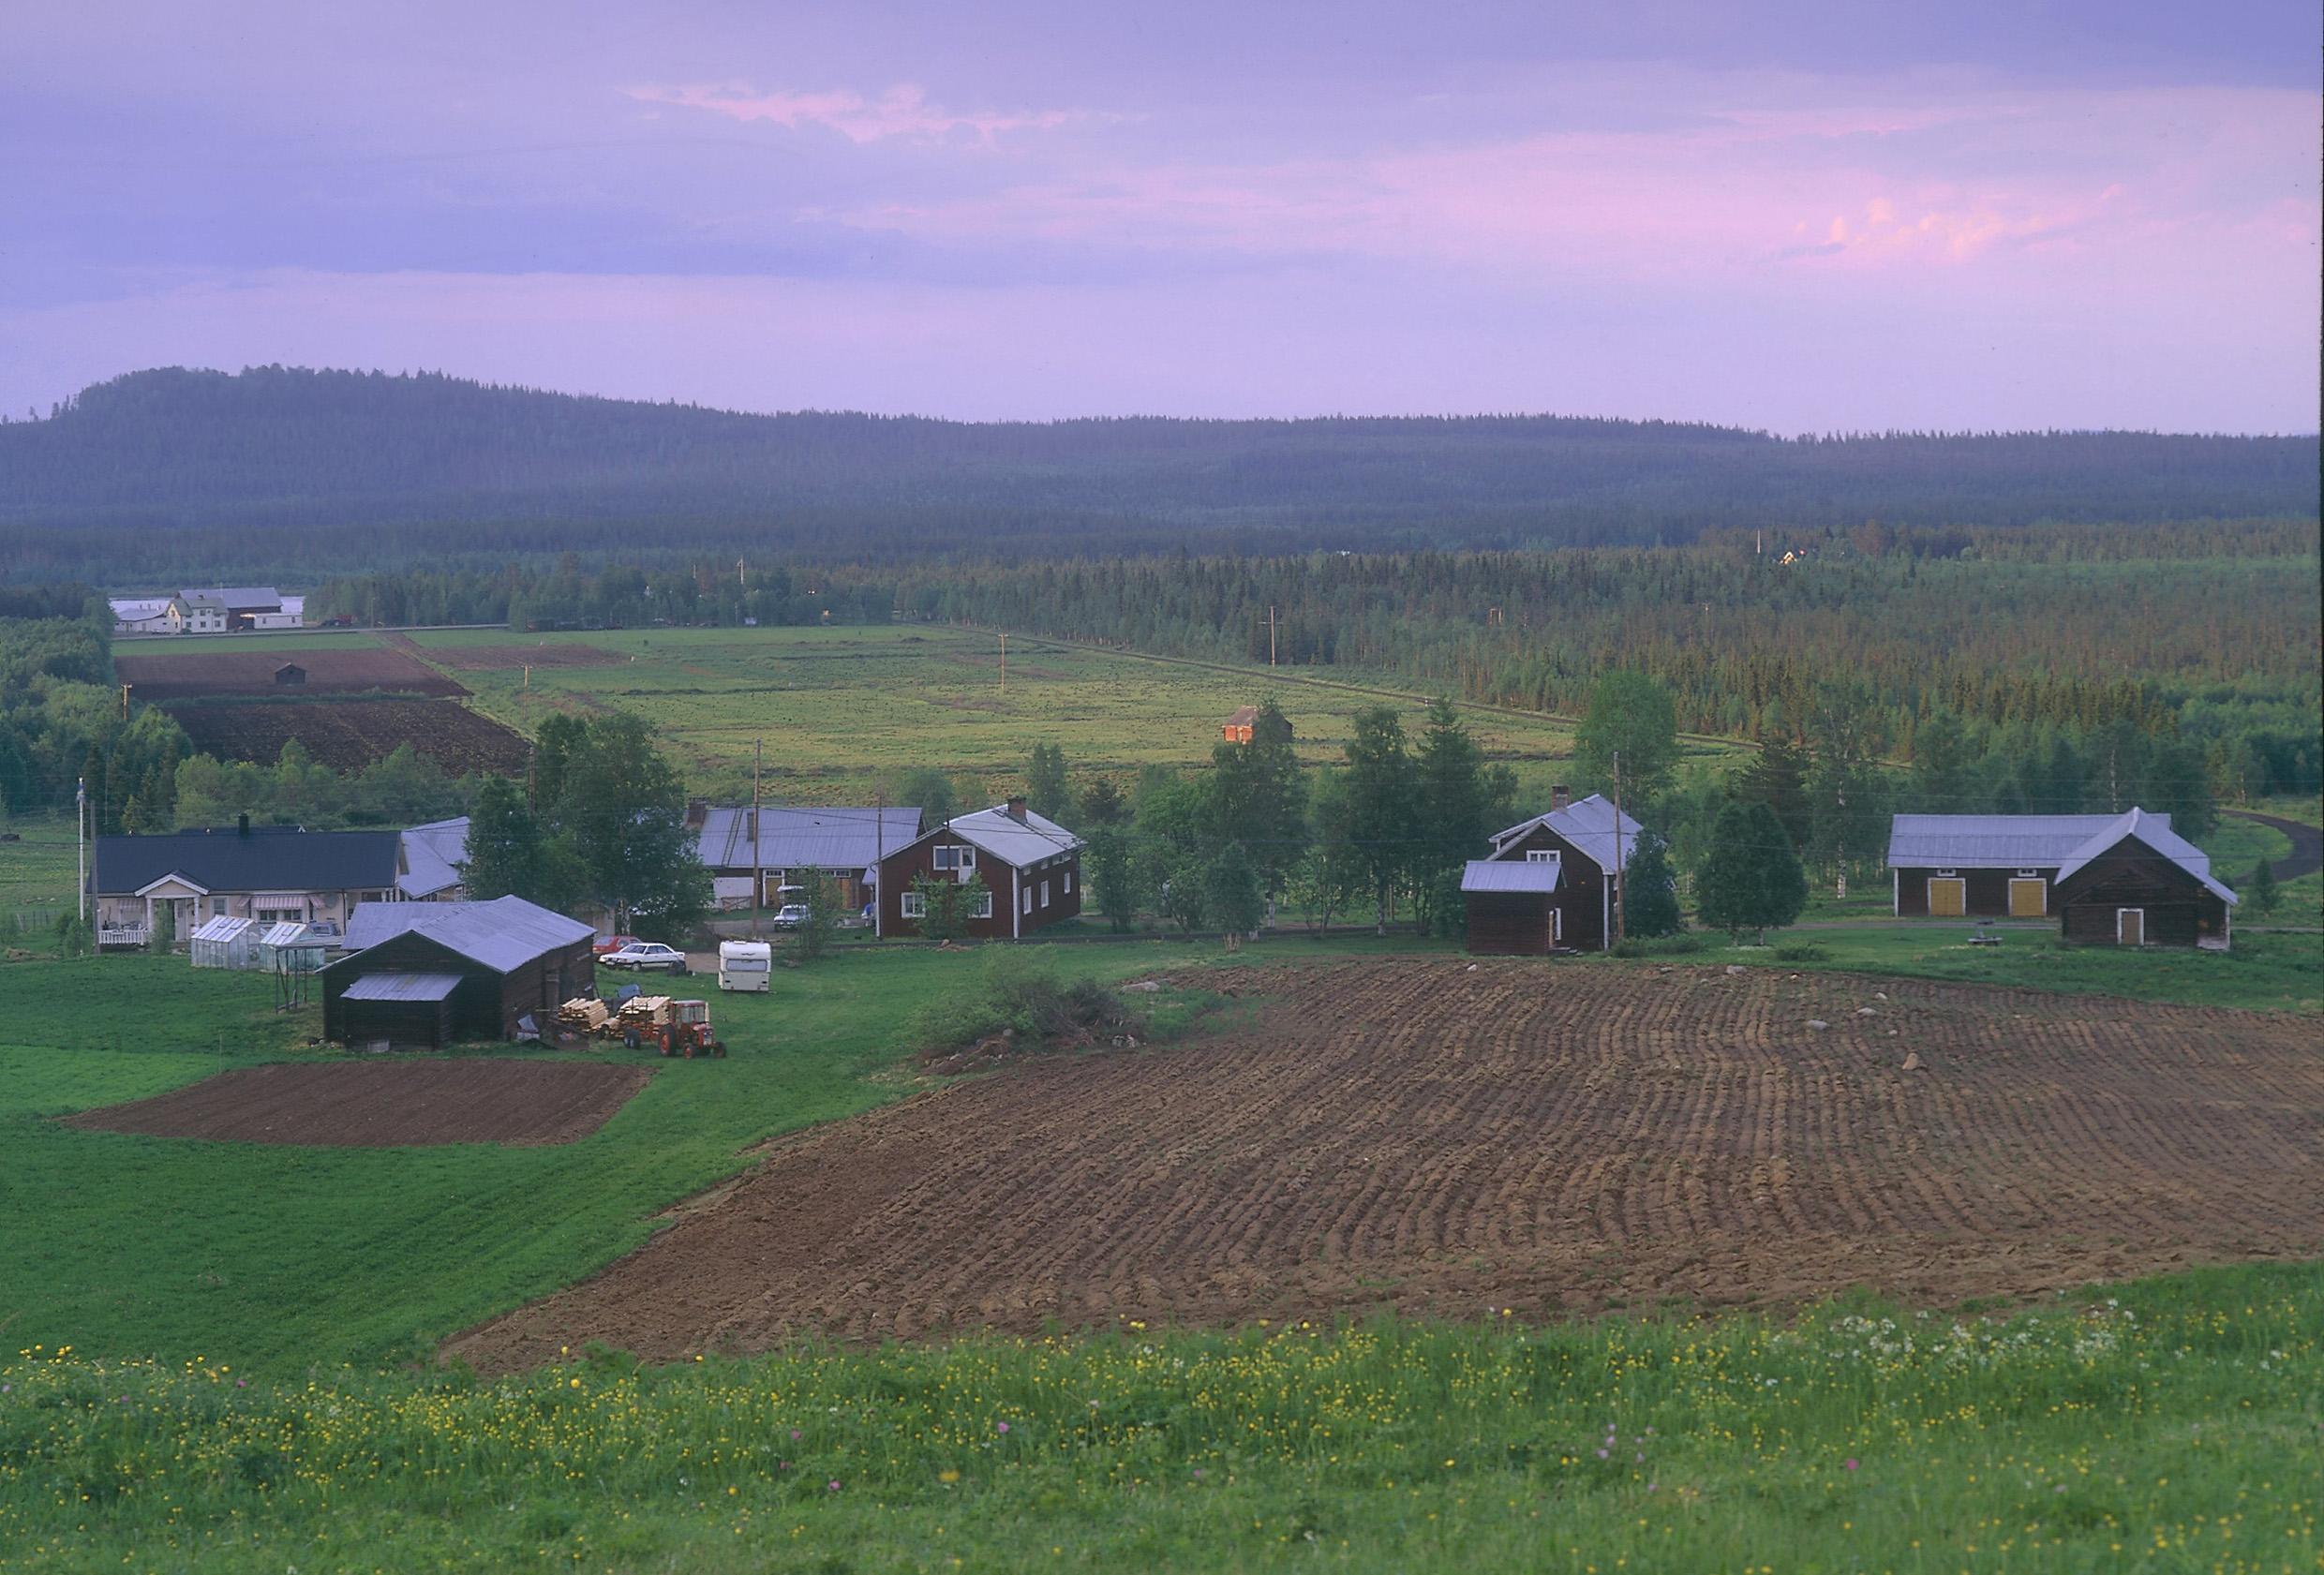 A countryside landscape with a few houses among fields and some trees. This is an area in Torne Valley, where the Tornedalers – one of the national minorities in Sweden – predominantly live.